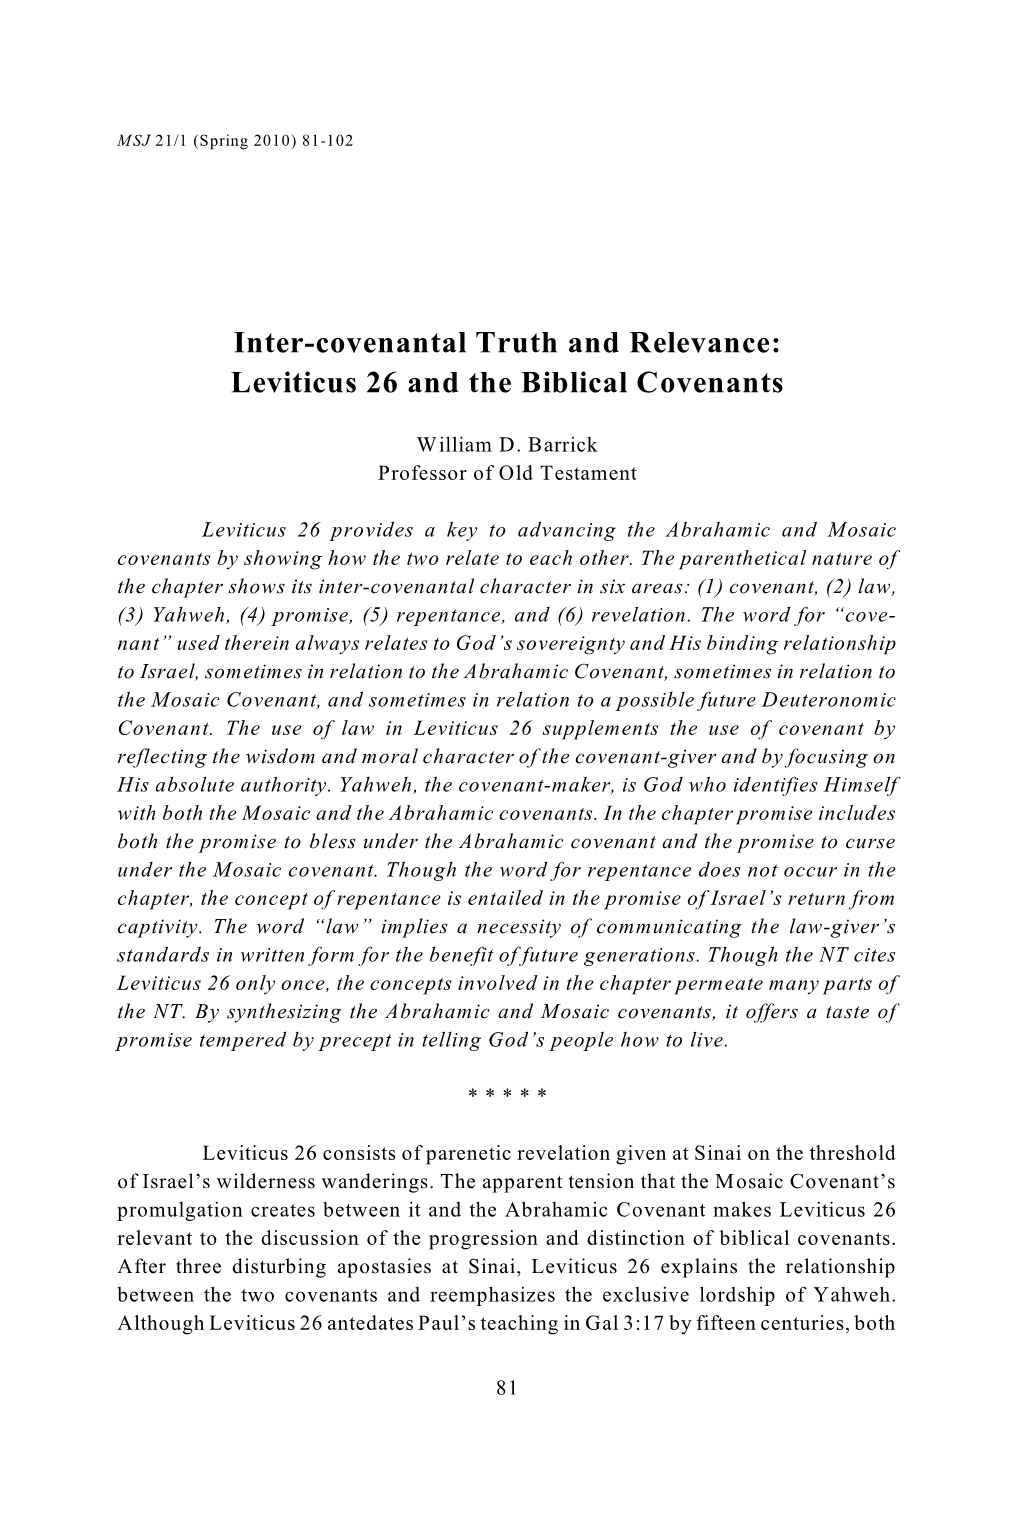 Inter-Covenantal Truth and Relevance: Leviticus 26 and the Biblical Covenants